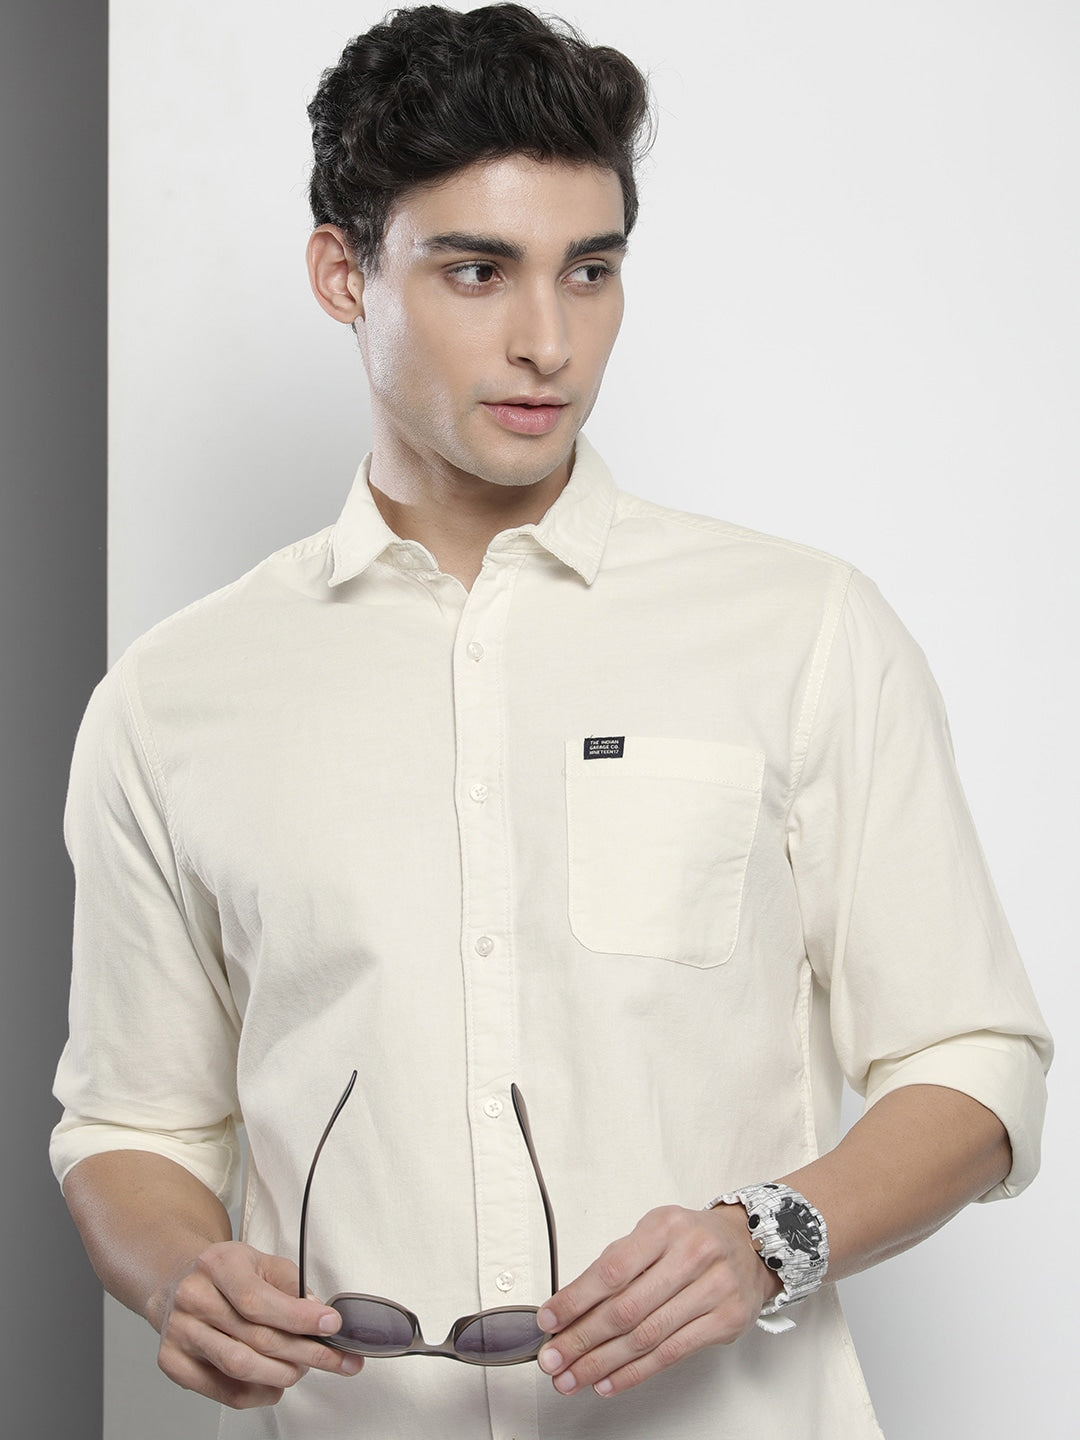 Buy White Shirts for Men by The Indian Garage Co Online